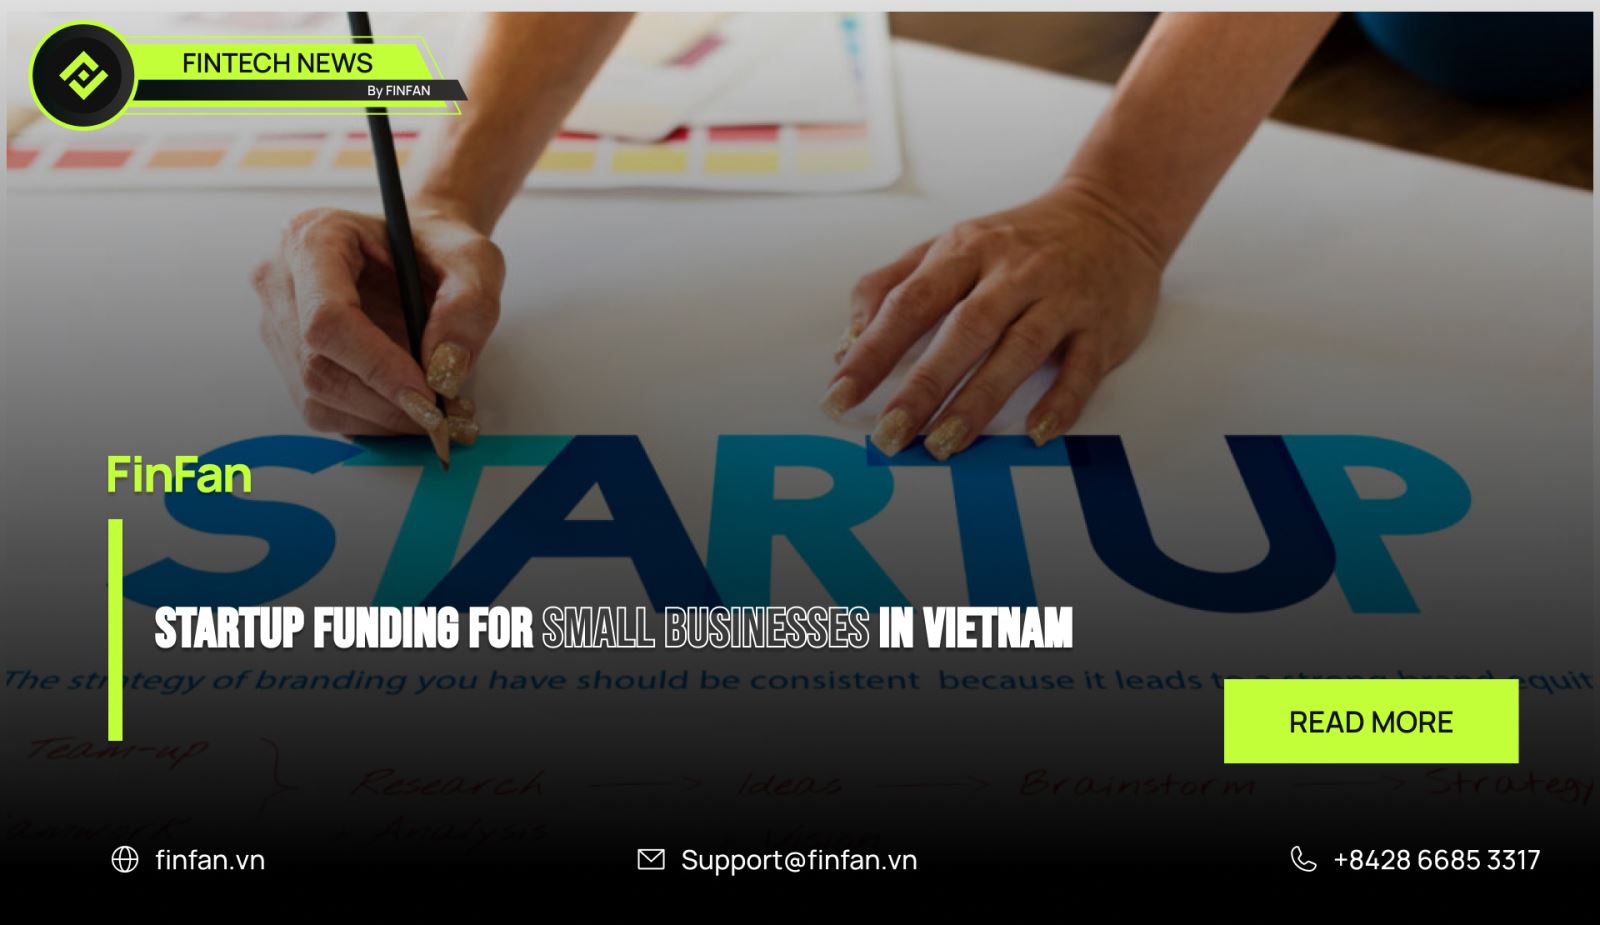 Startup funding for small businesses in Vietnam